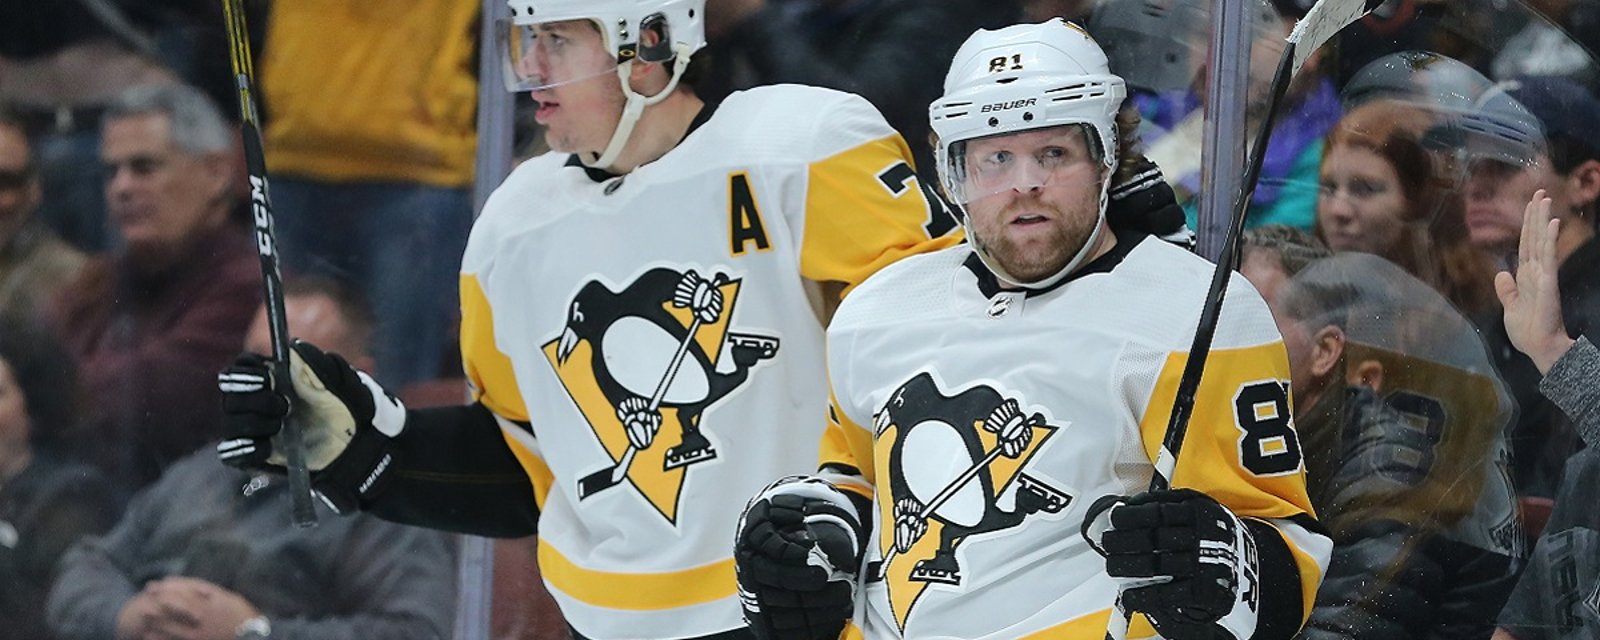 Evgeni Malkin calls out Phil Kessel after another strong performance.